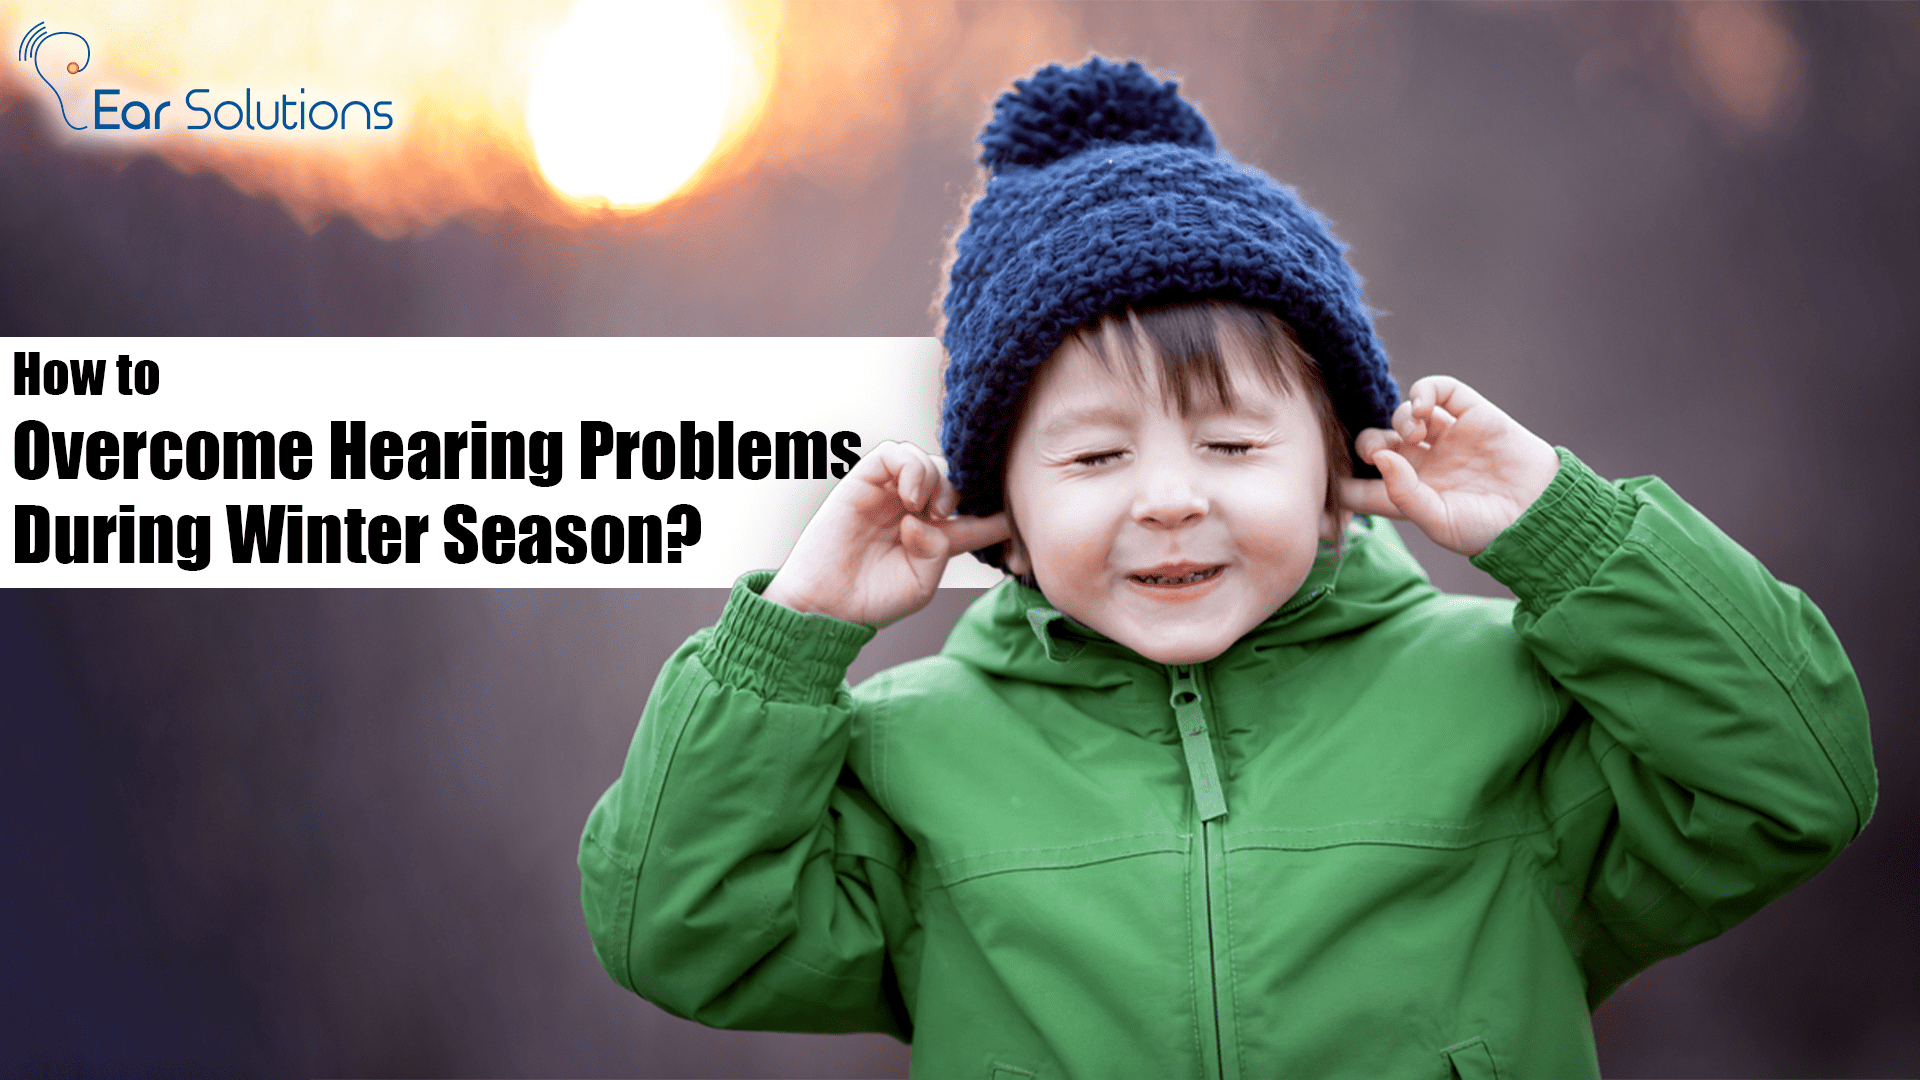 How to Overcome Hearing Problems During Winter Season? - Earsolutions